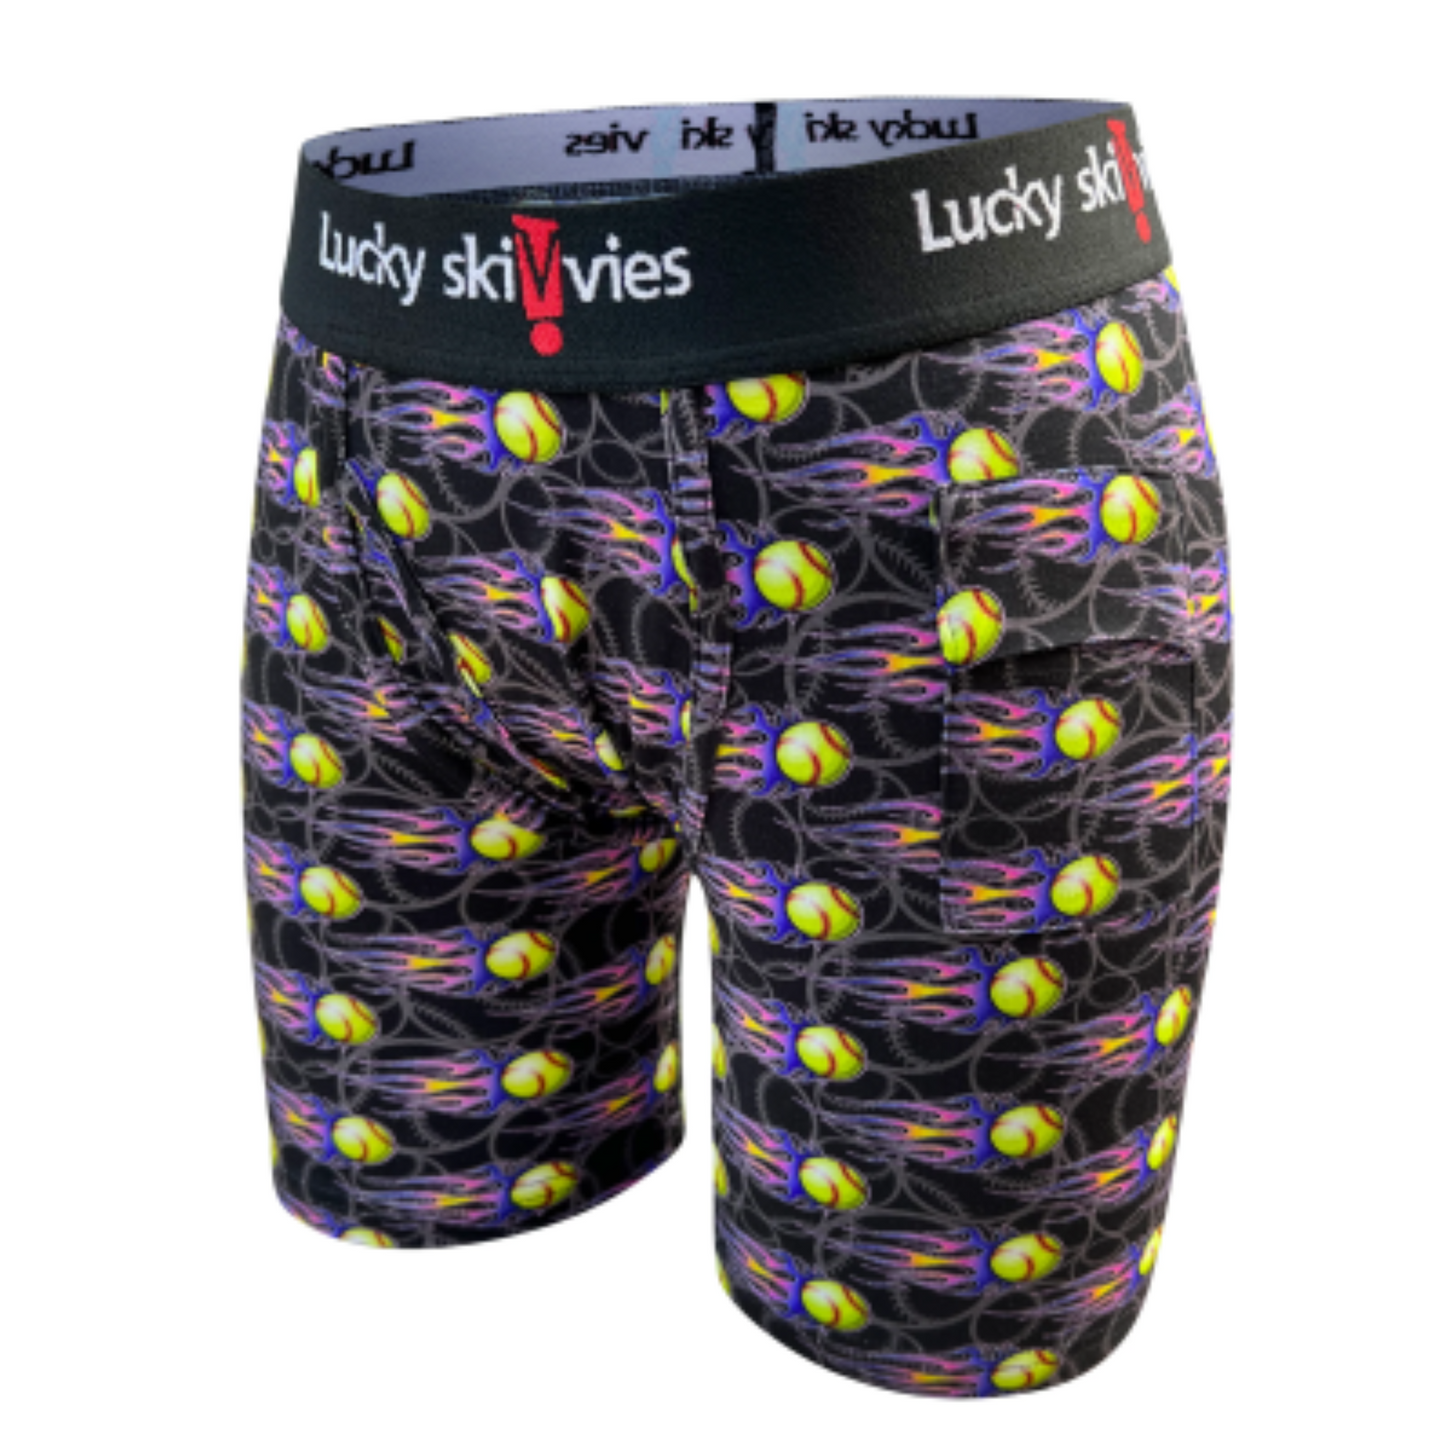 Flaming Softball Gender Neutral Boxer Briefs by Lucky Skivvies (Copy)